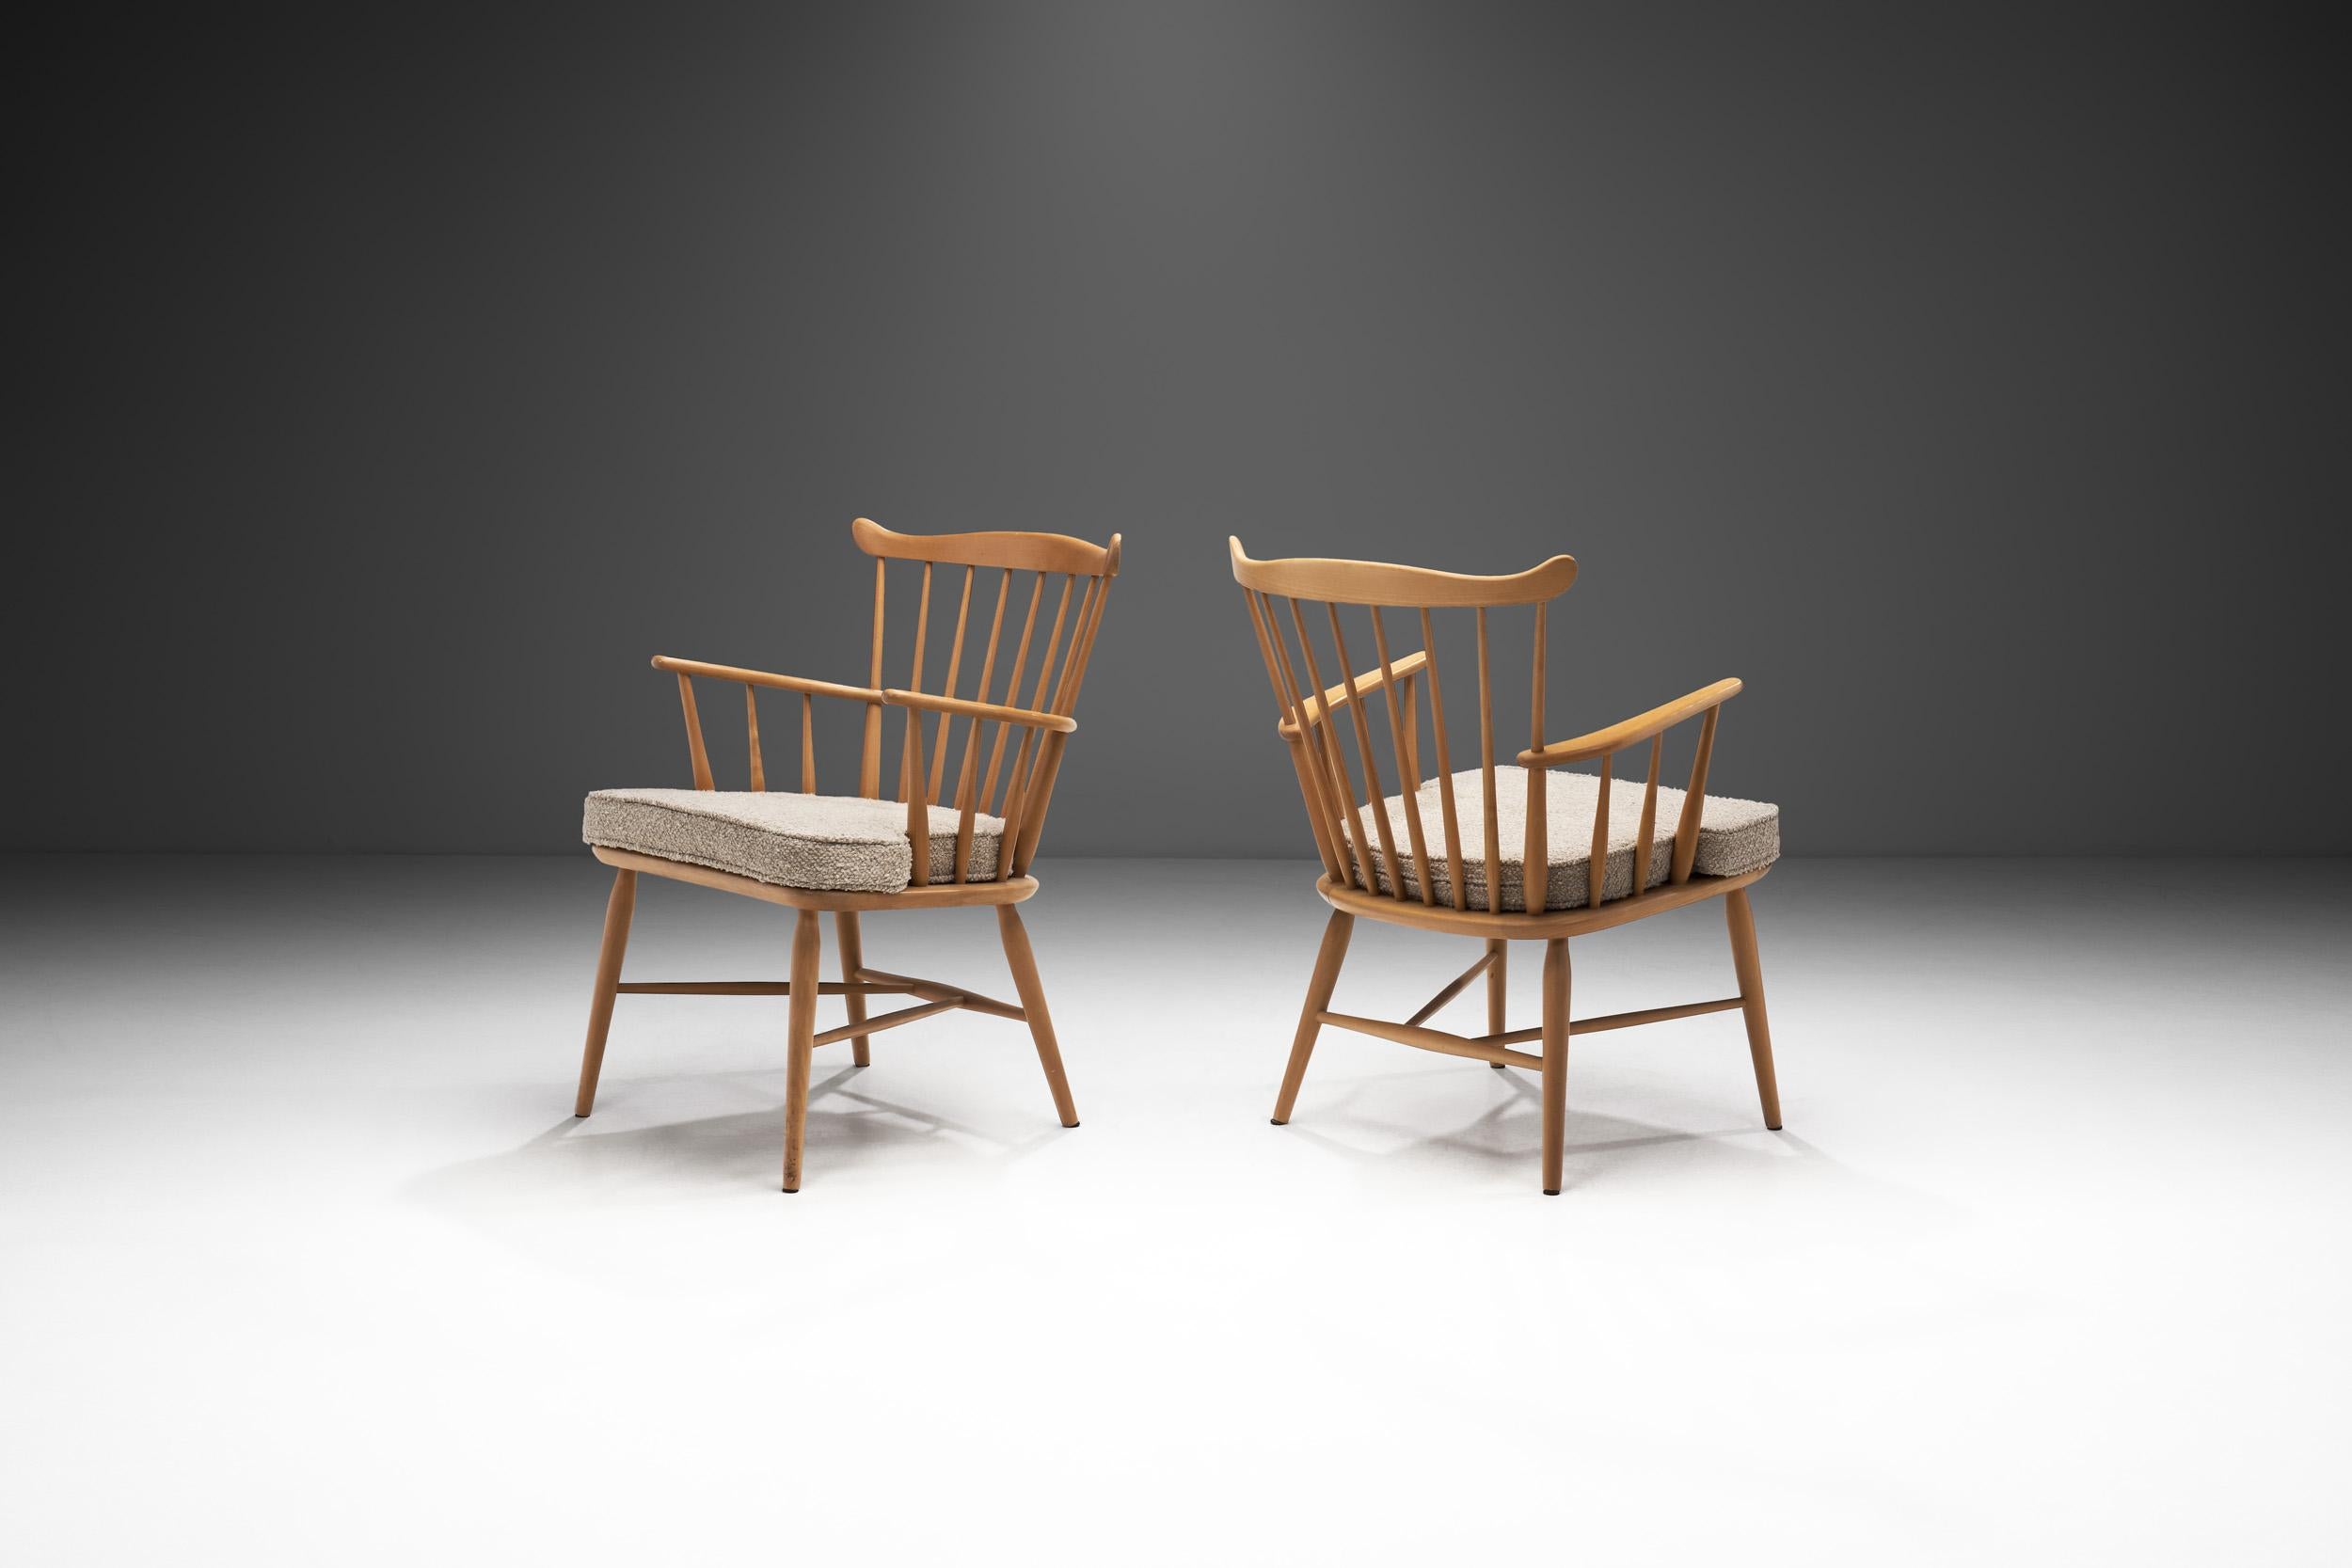 The designs of Borge Mogensen aimed at functionality, minimalist appearance and easy accessibility. This pair of slatback chairs is perhaps one of the best examples of these principles of the Danish master with a rustic yet modern design.

The most